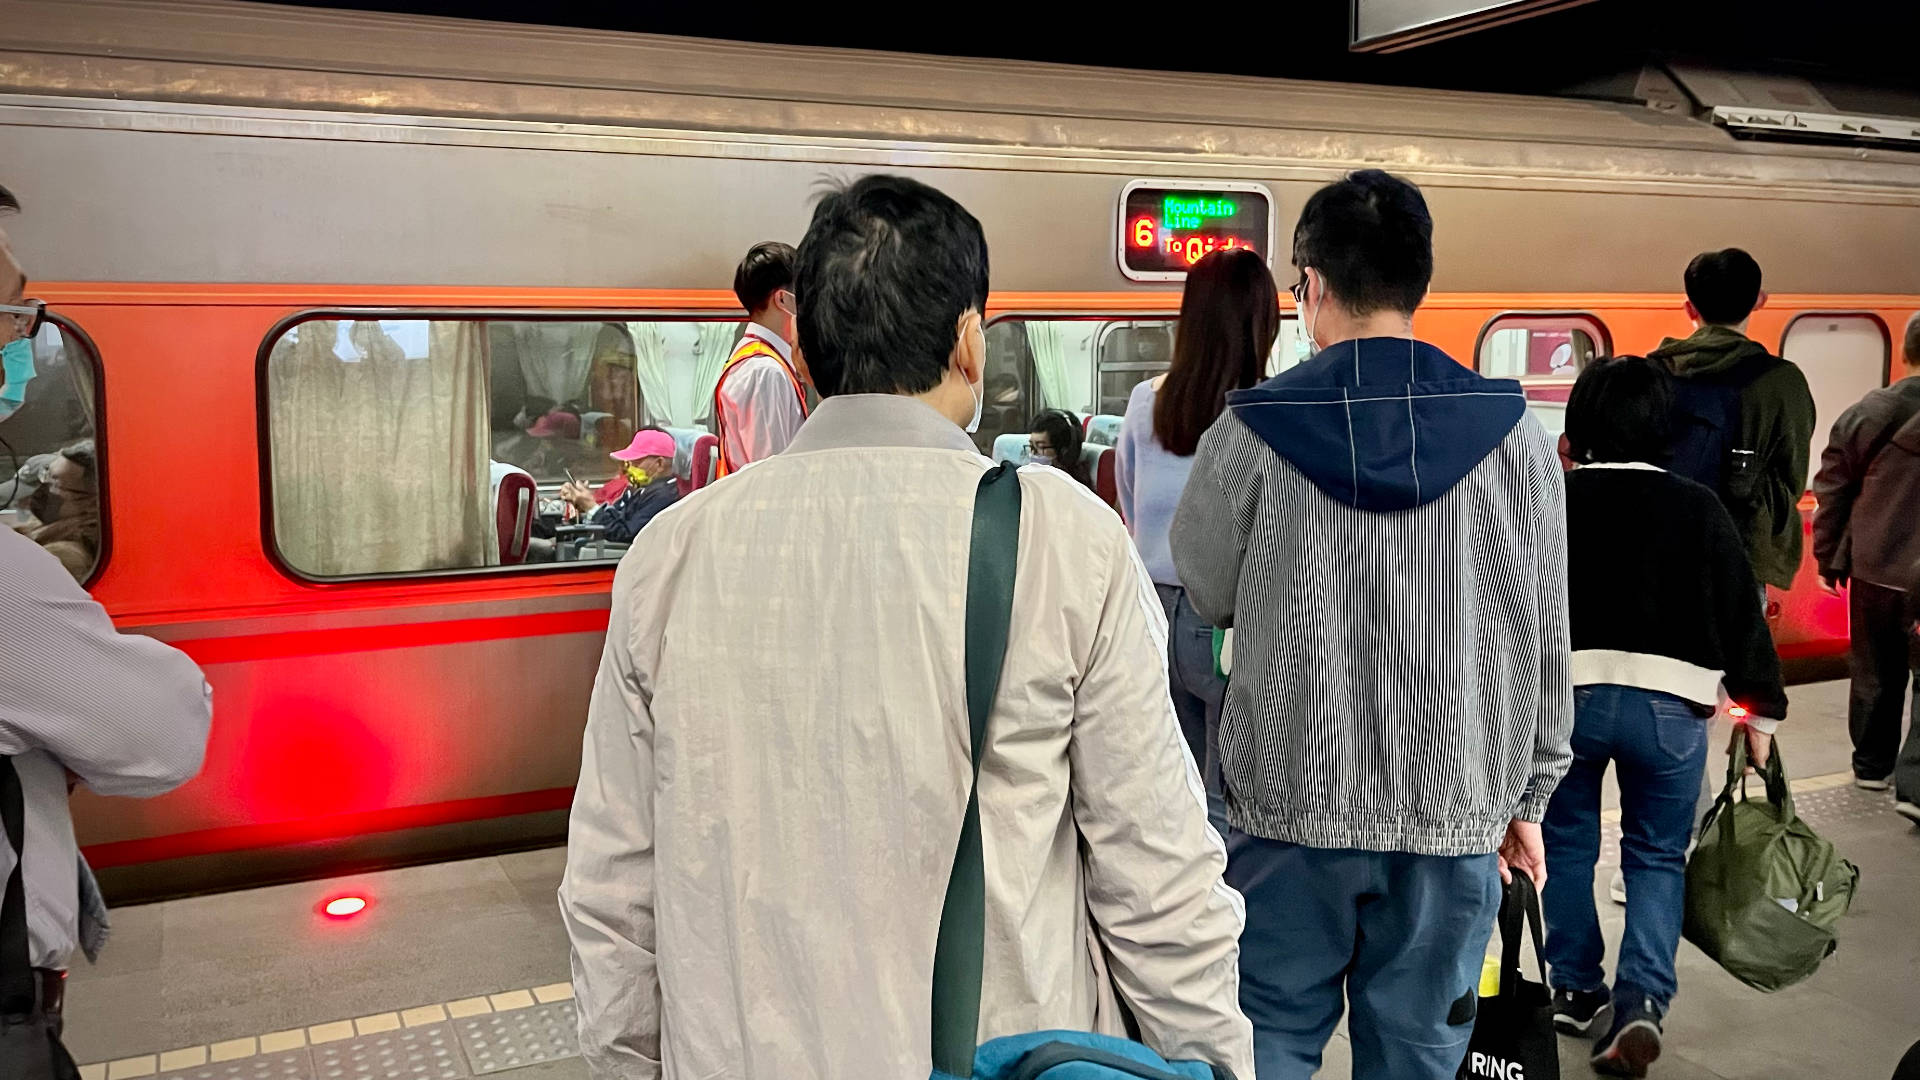 Passengers queueing to board an orange-and-silver railway carriage. A sign on the carriage says “Mountain Line – 6 – To Qidu”.